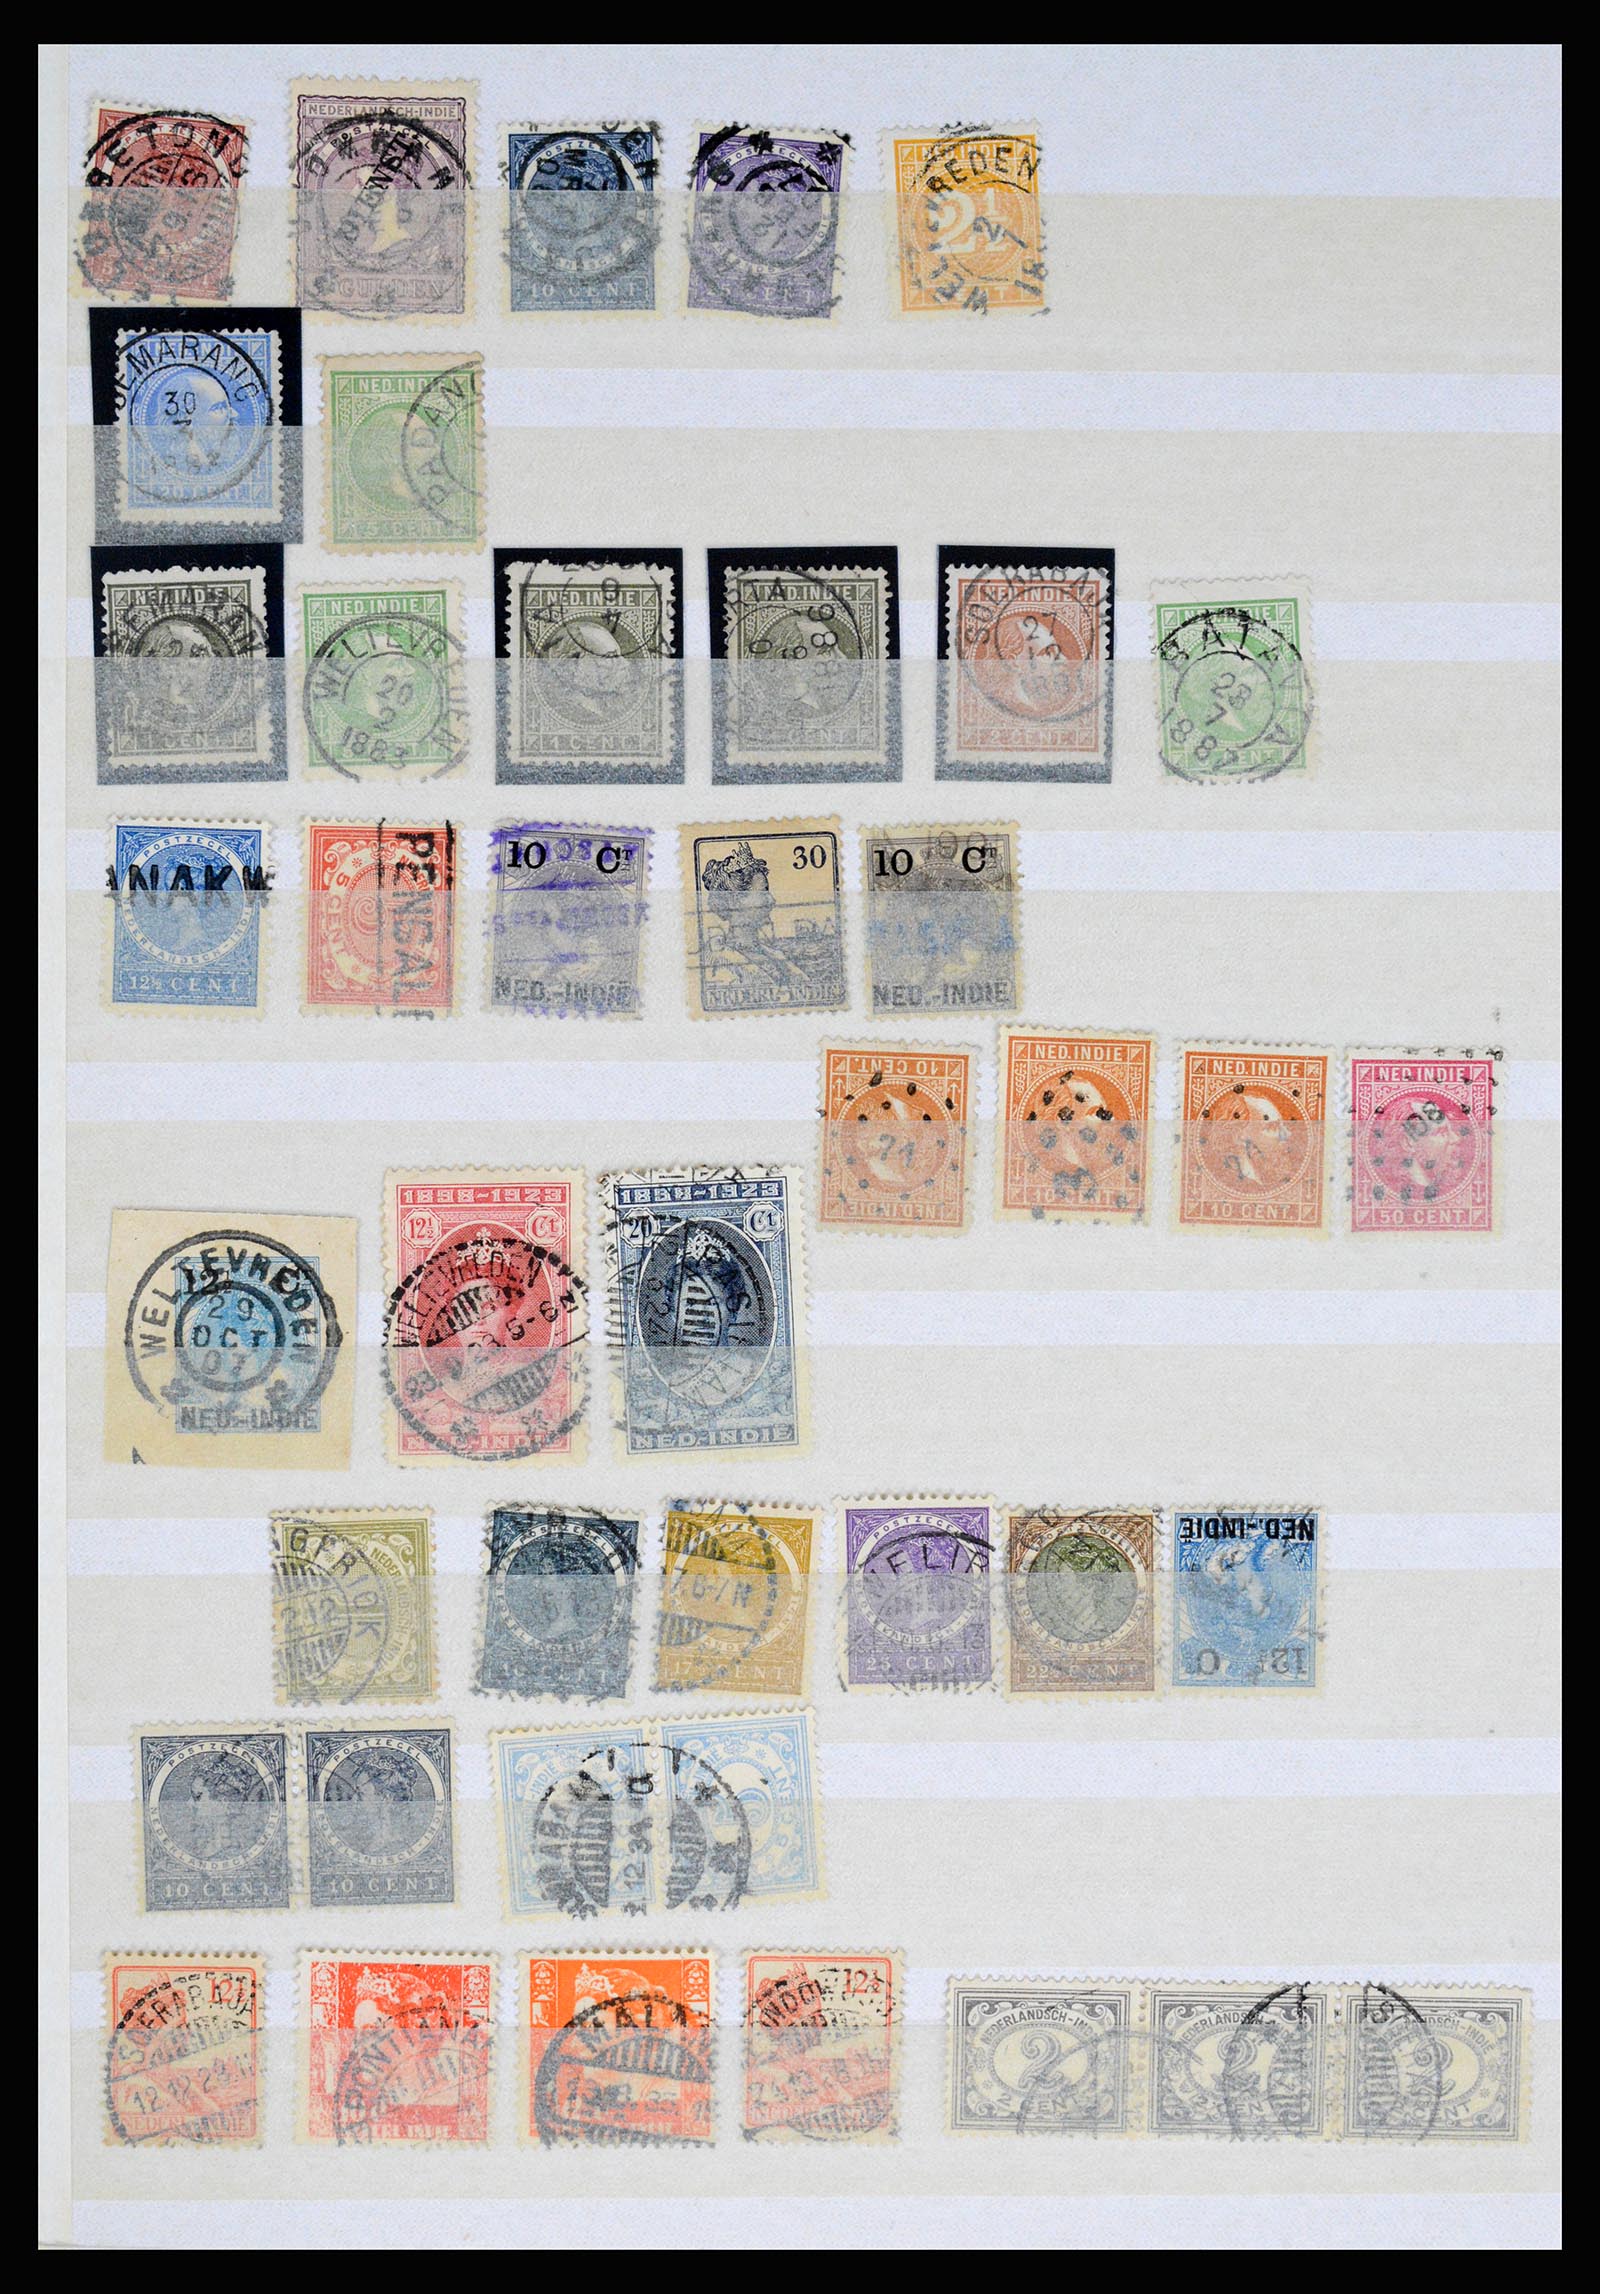 36839 108 - Stamp collection 36839 Dutch east Indies square cancels.